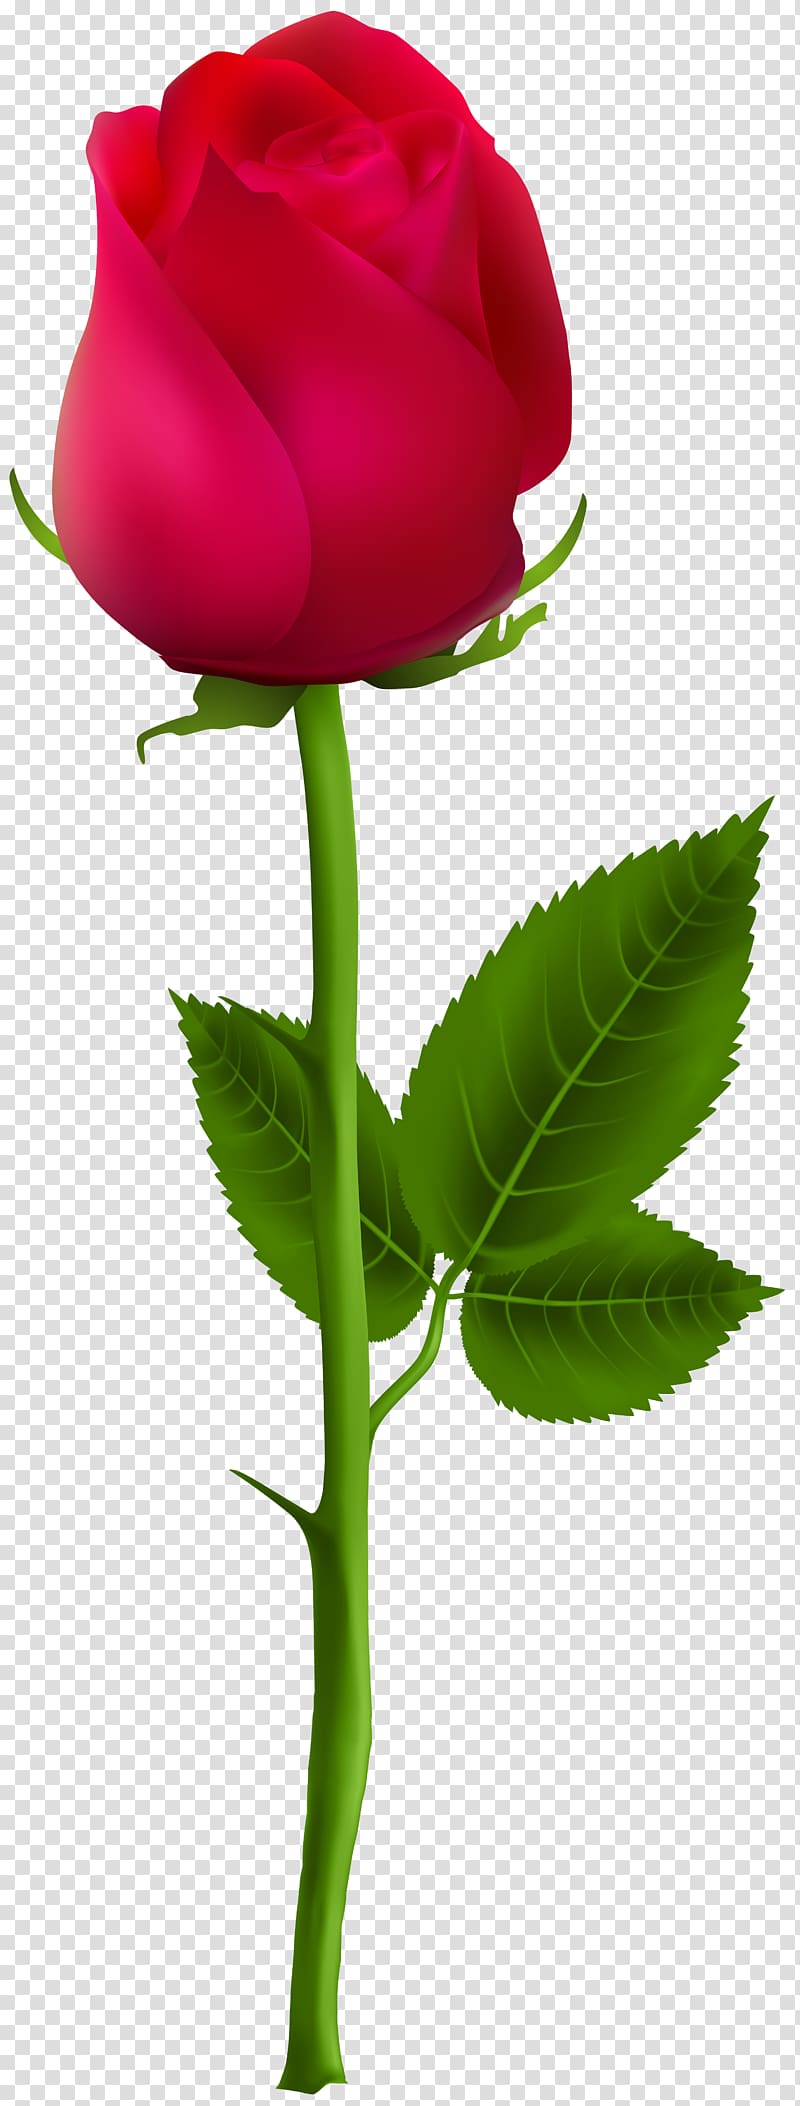 red rose, PicsArt Studio editing , Red Rose transparent background PNG clipart